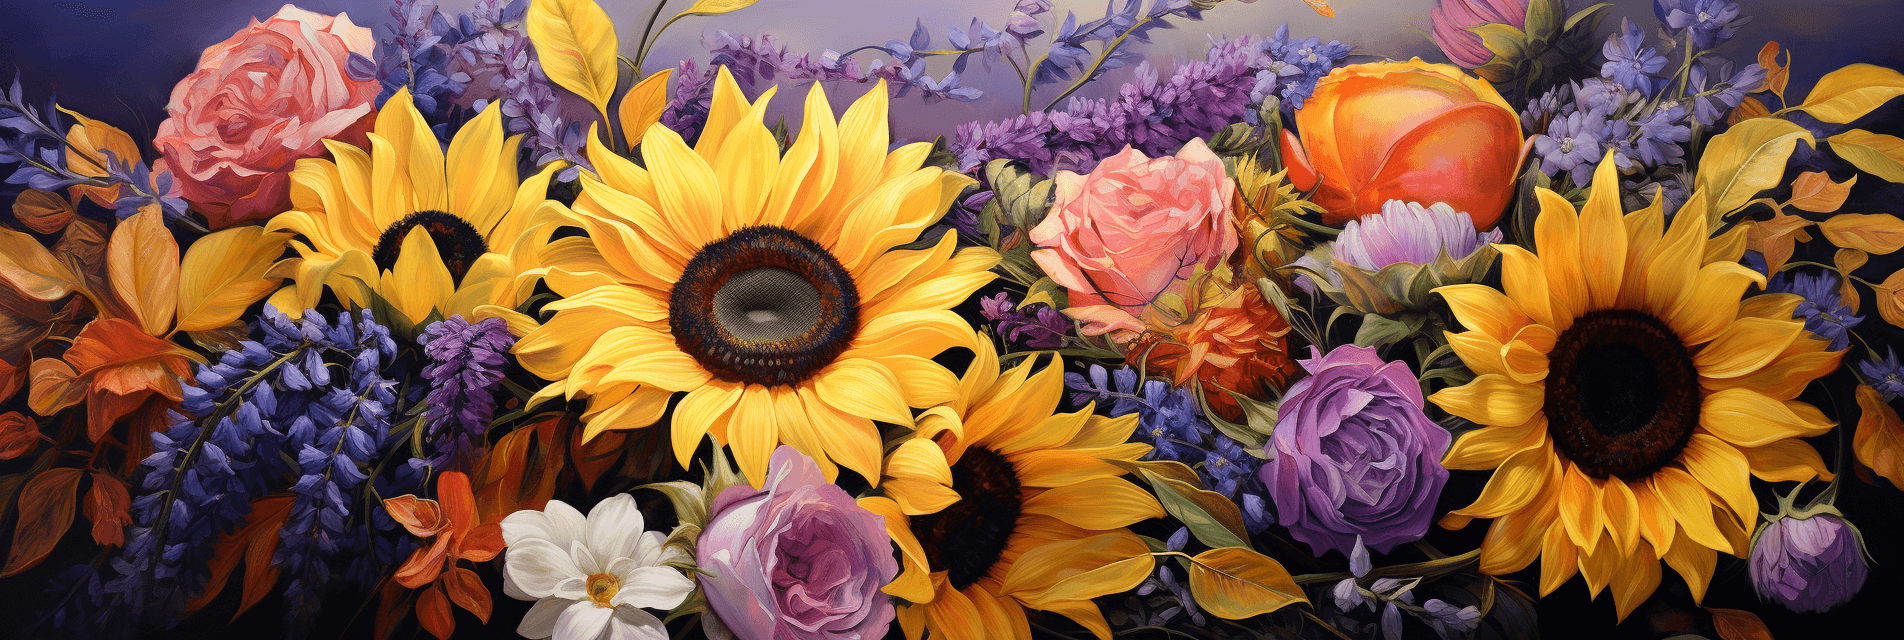 Sunflowers Lavender and Roses